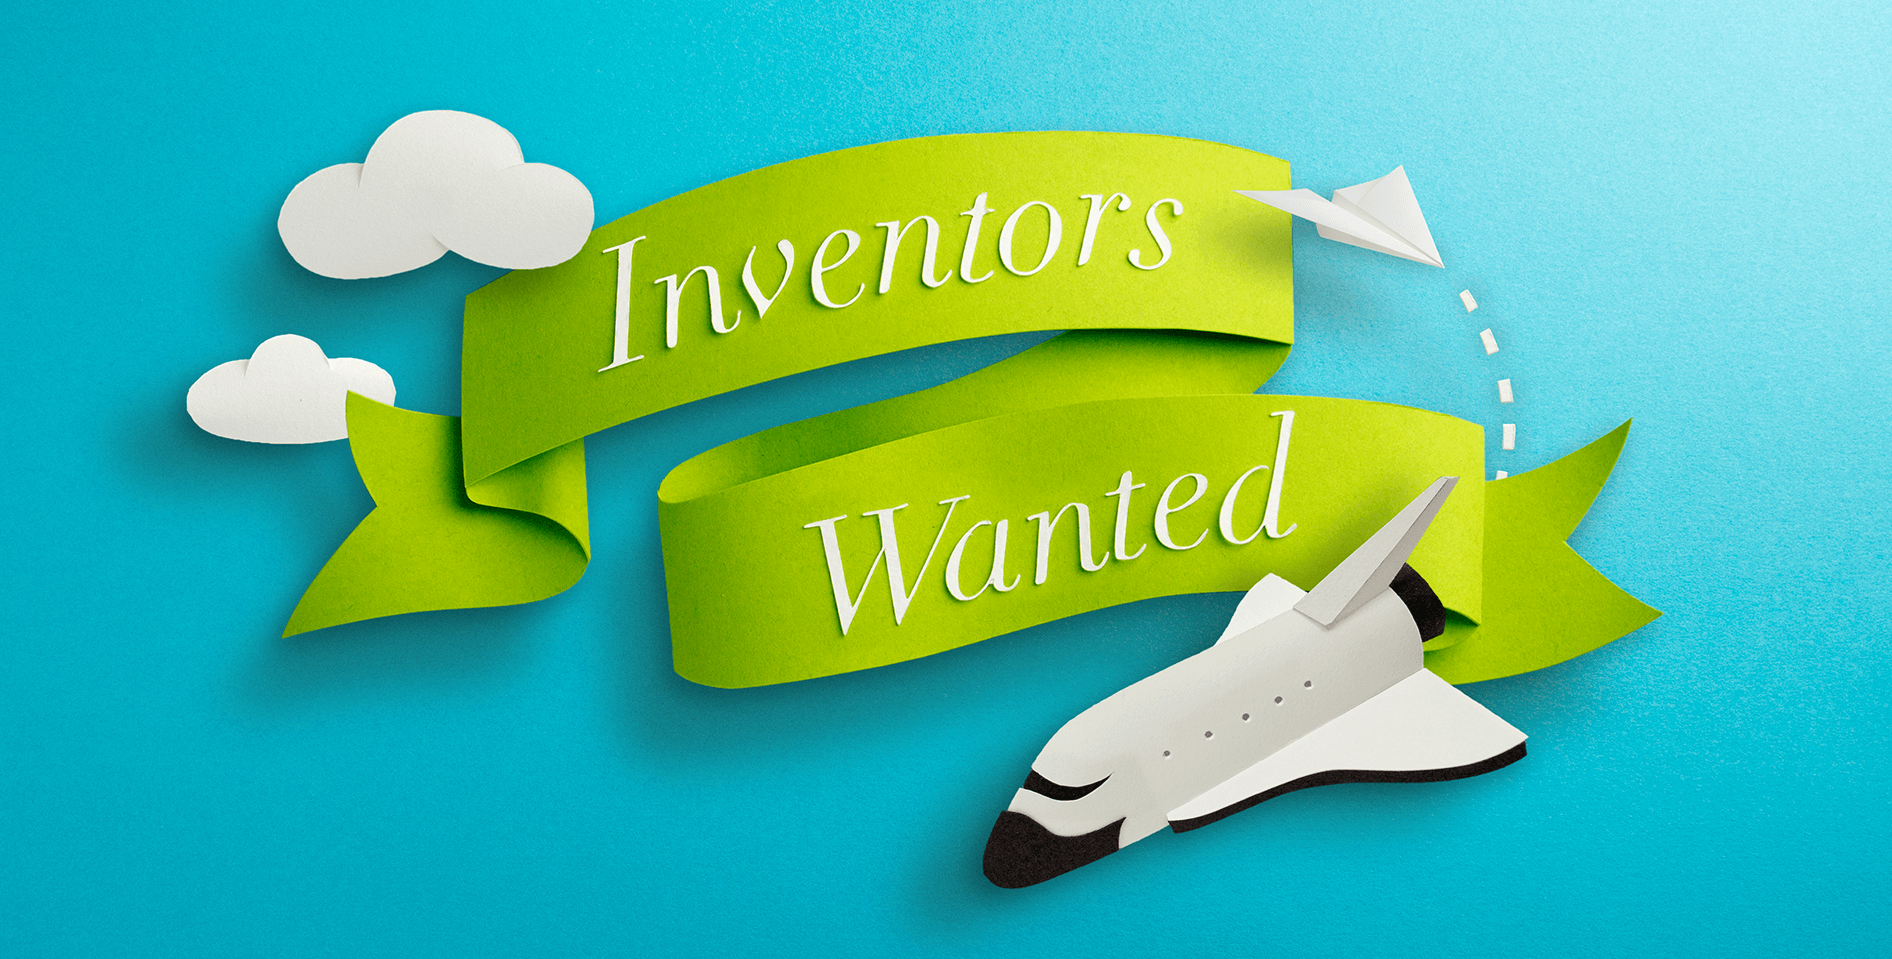 M&S Inventors Wanted